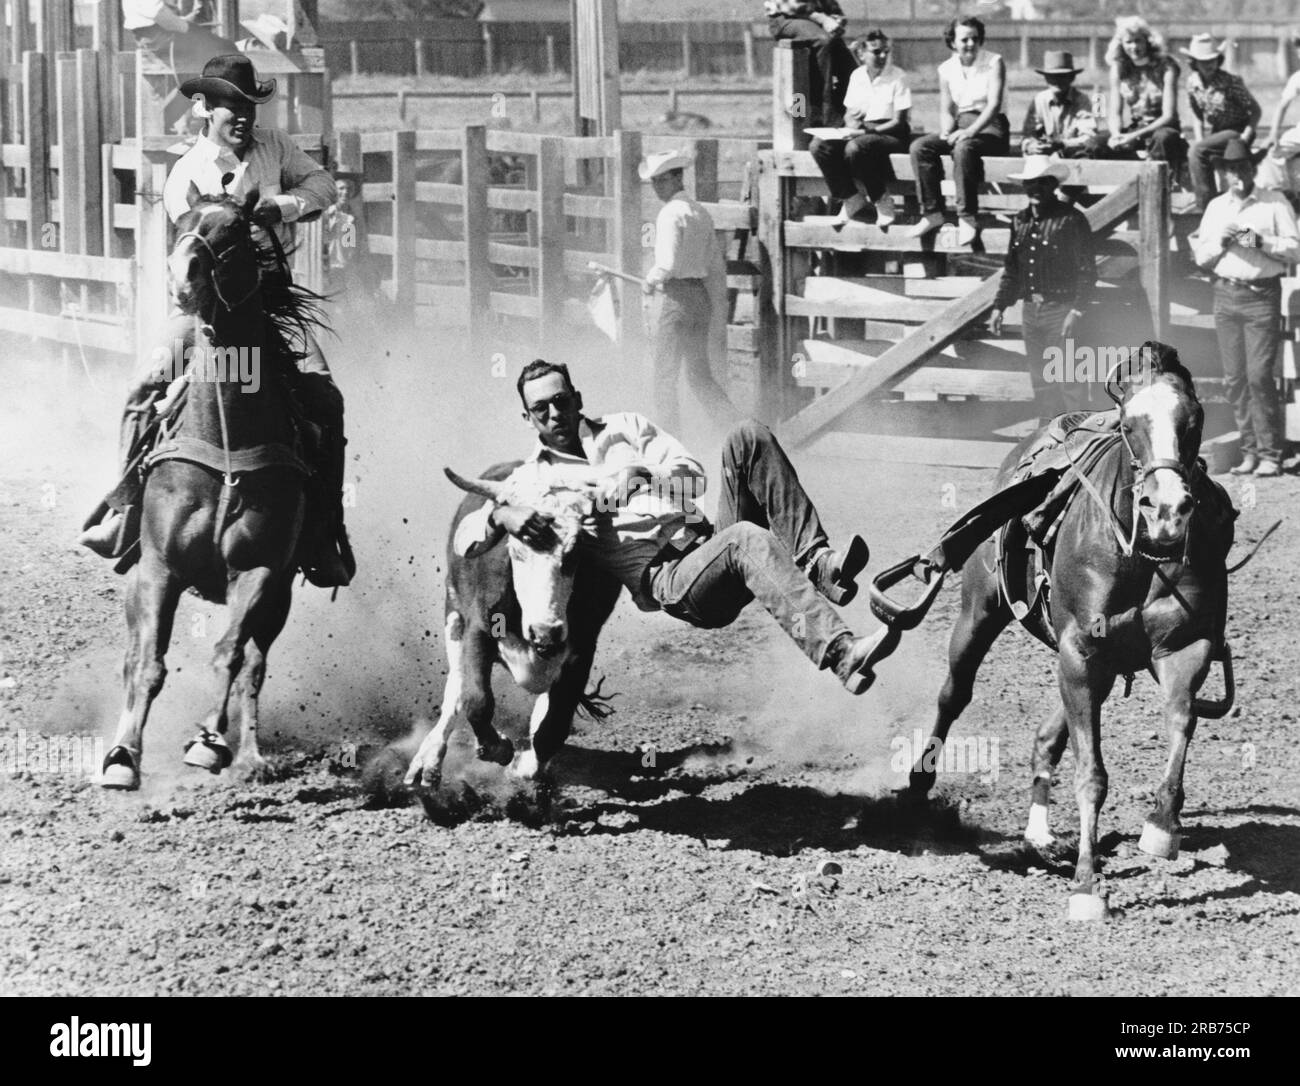 Kansas City, Missouri:  c. 1955 A steer wrestler, or bulldogger grabs a 700 pound steer by the horns to bring it to a stop and then onto the ground with all four feet free. He is timed against a stopwatch. Stock Photo